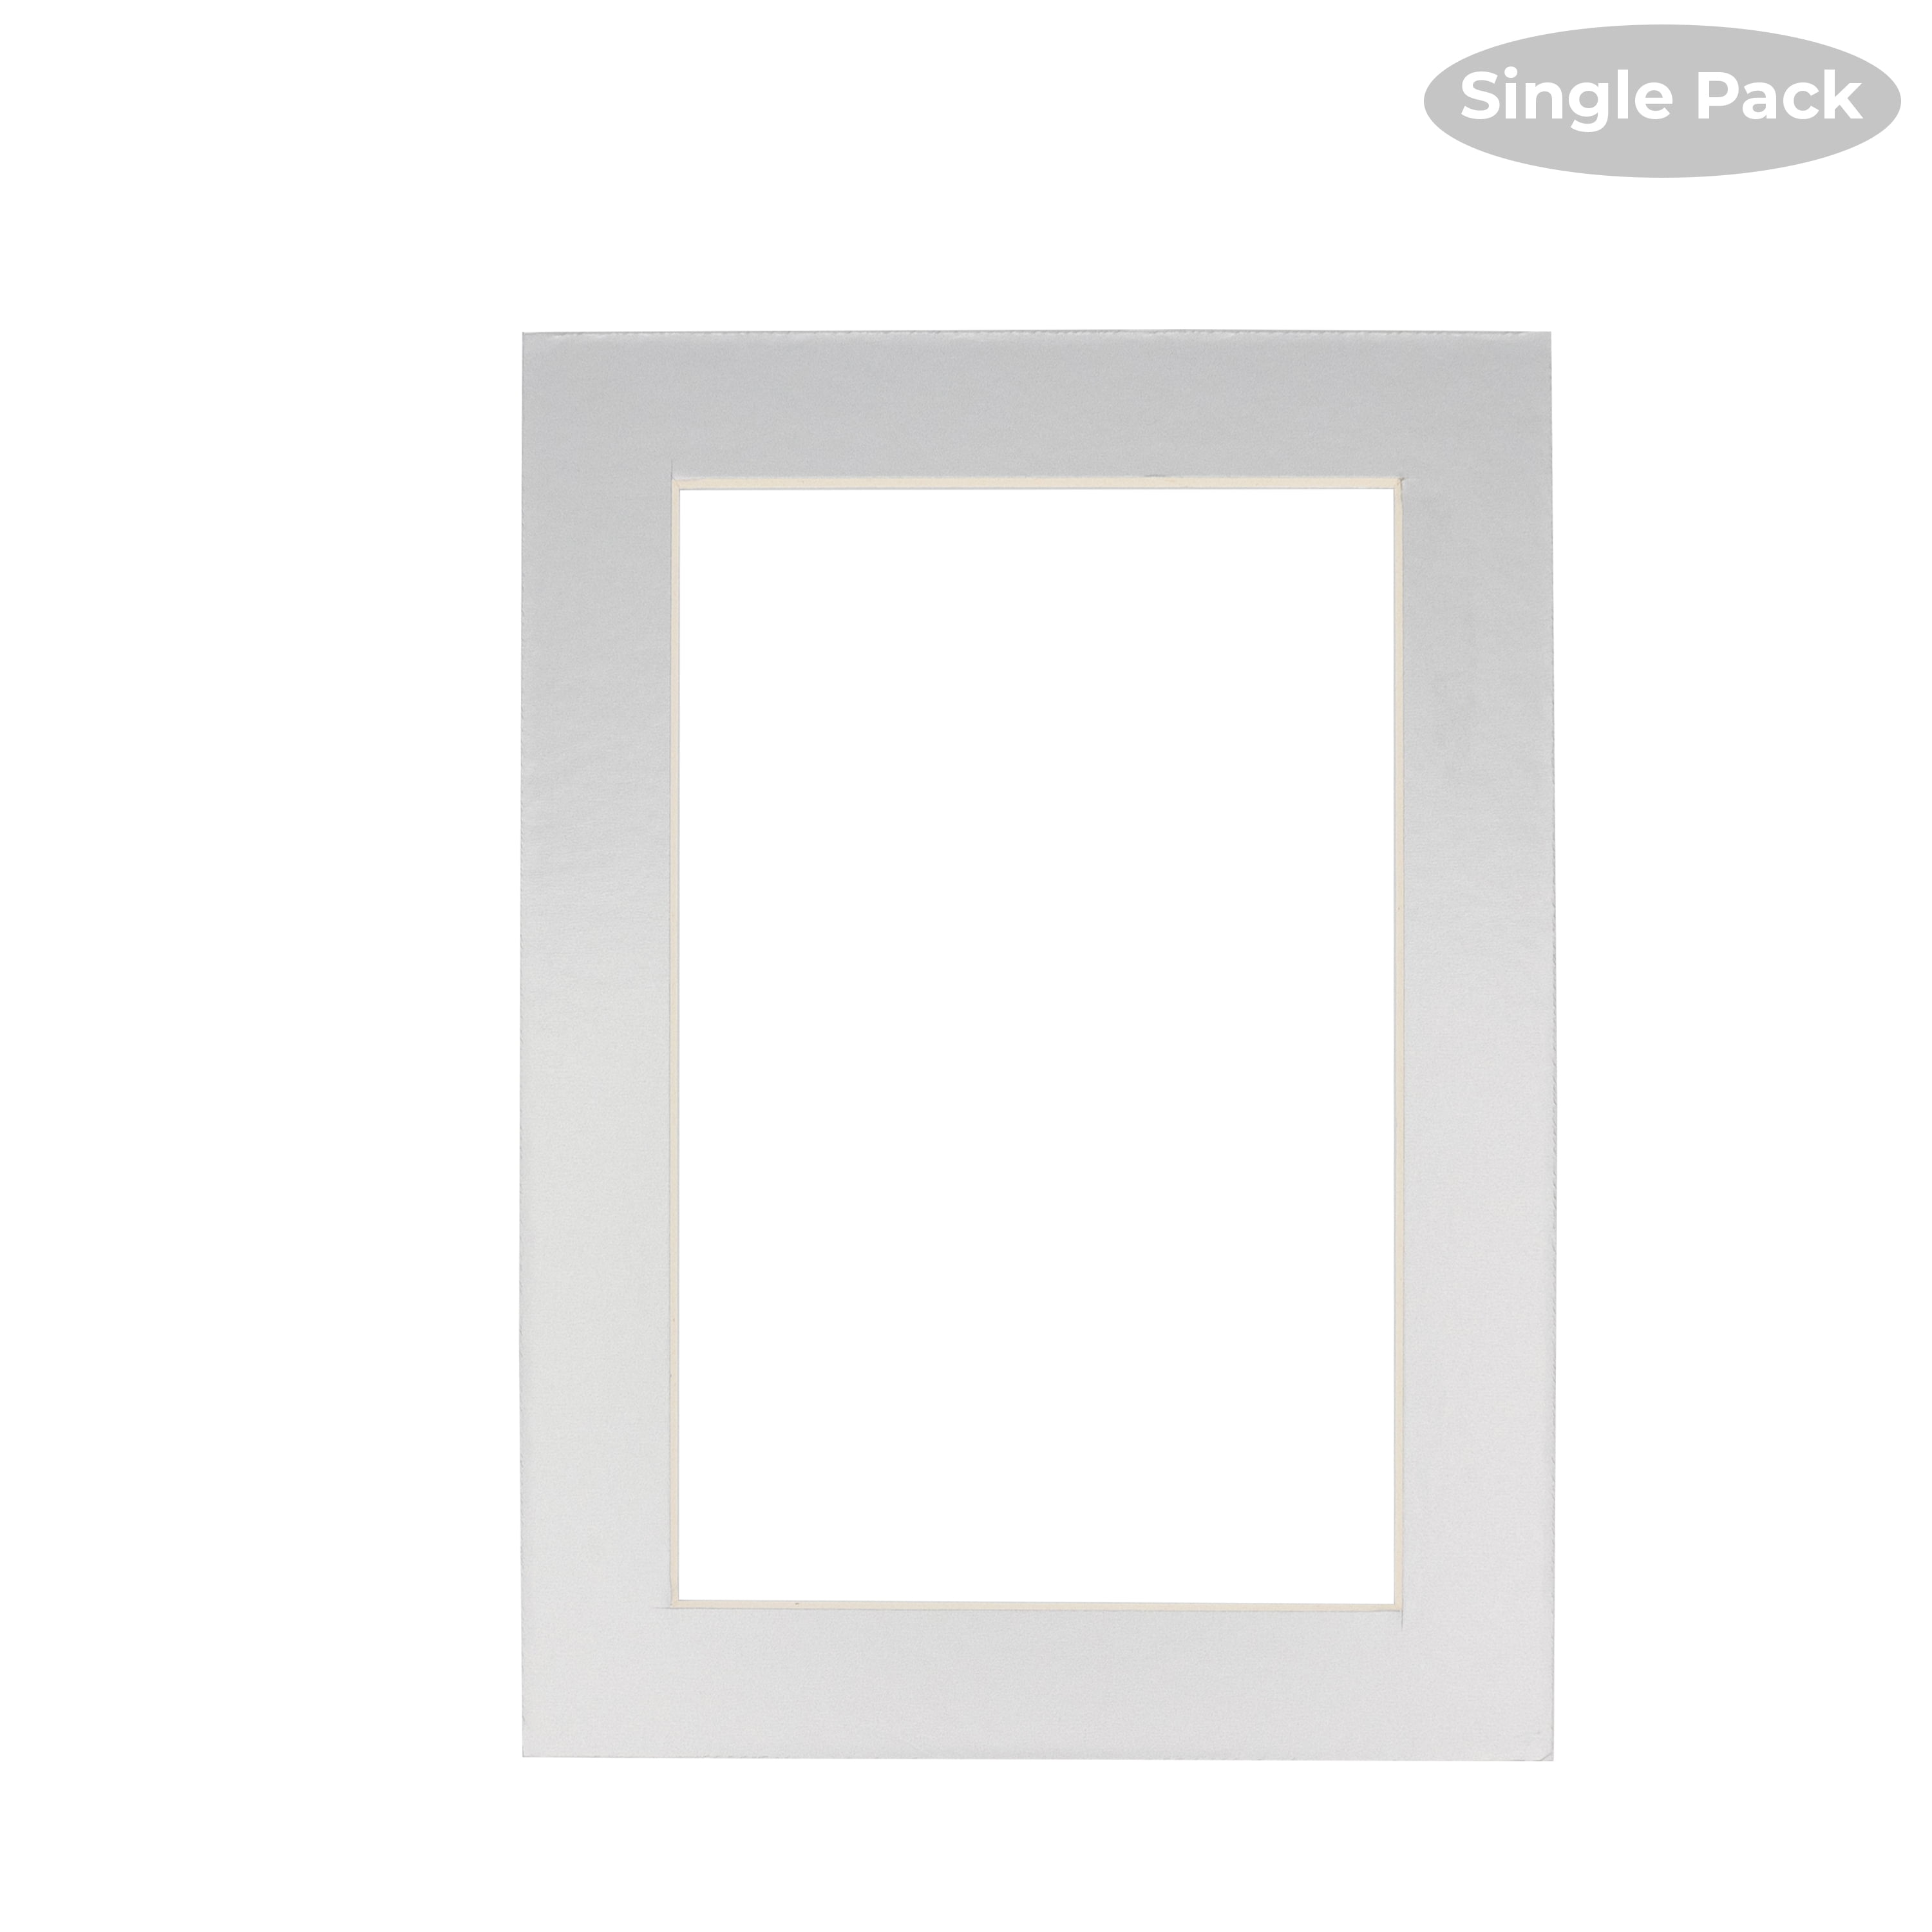 Metallic Silver Acid Free 11x14 Picture Frame Mats with White Core Bevel  Cut for 8x10 Pictures - 